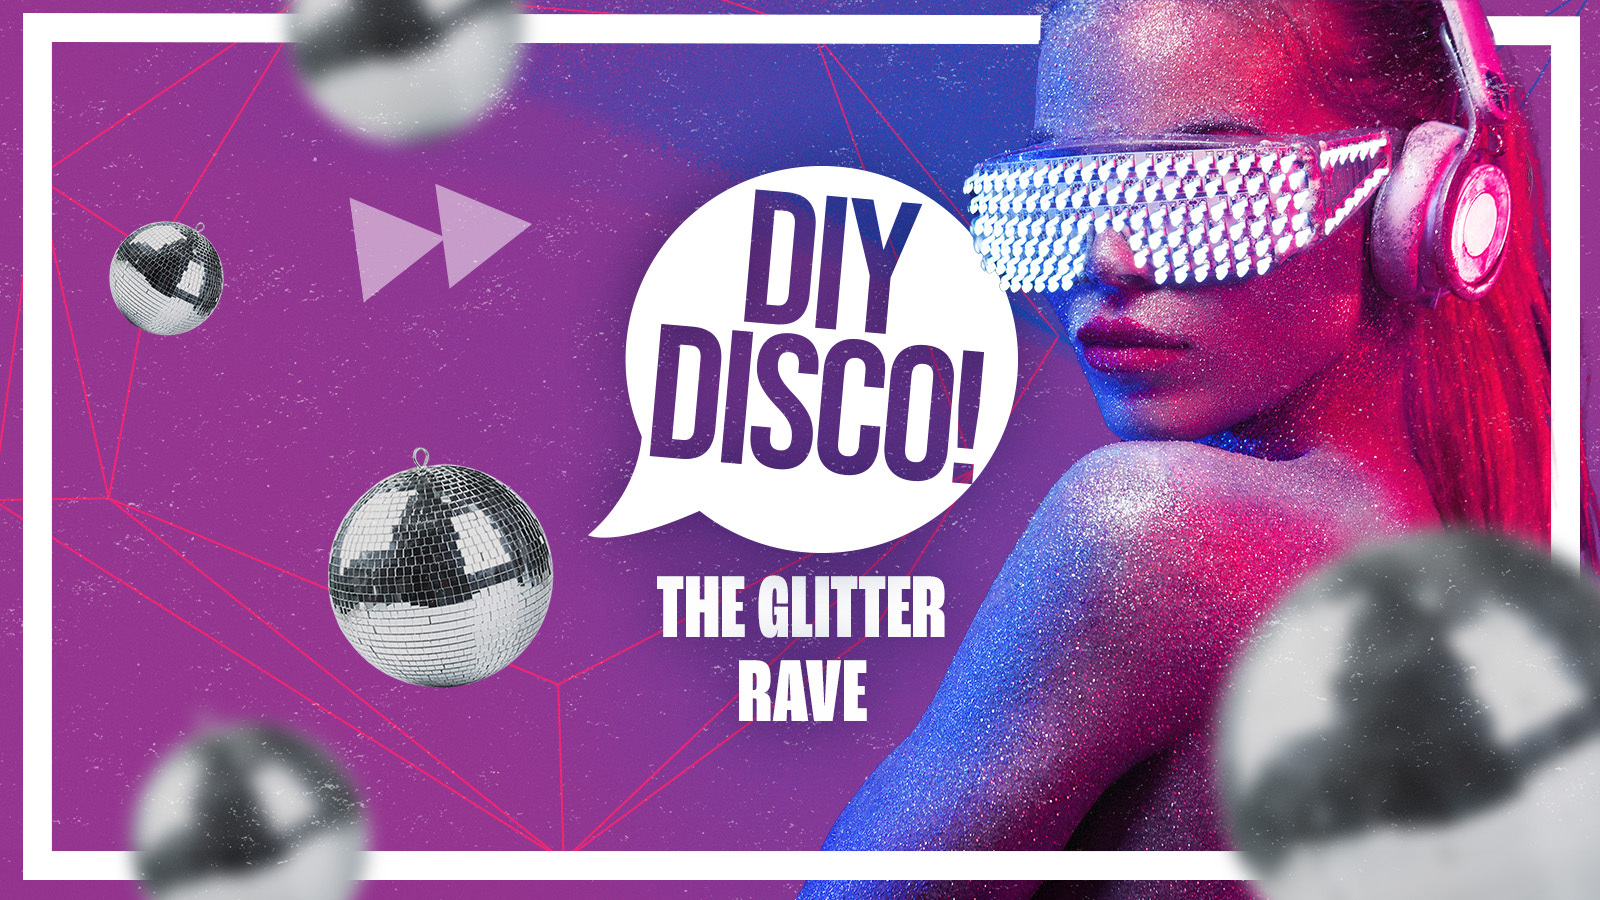 DIY The Glitter Rave DISCO ✨ at Home, Lincoln on 29th Sep 2022